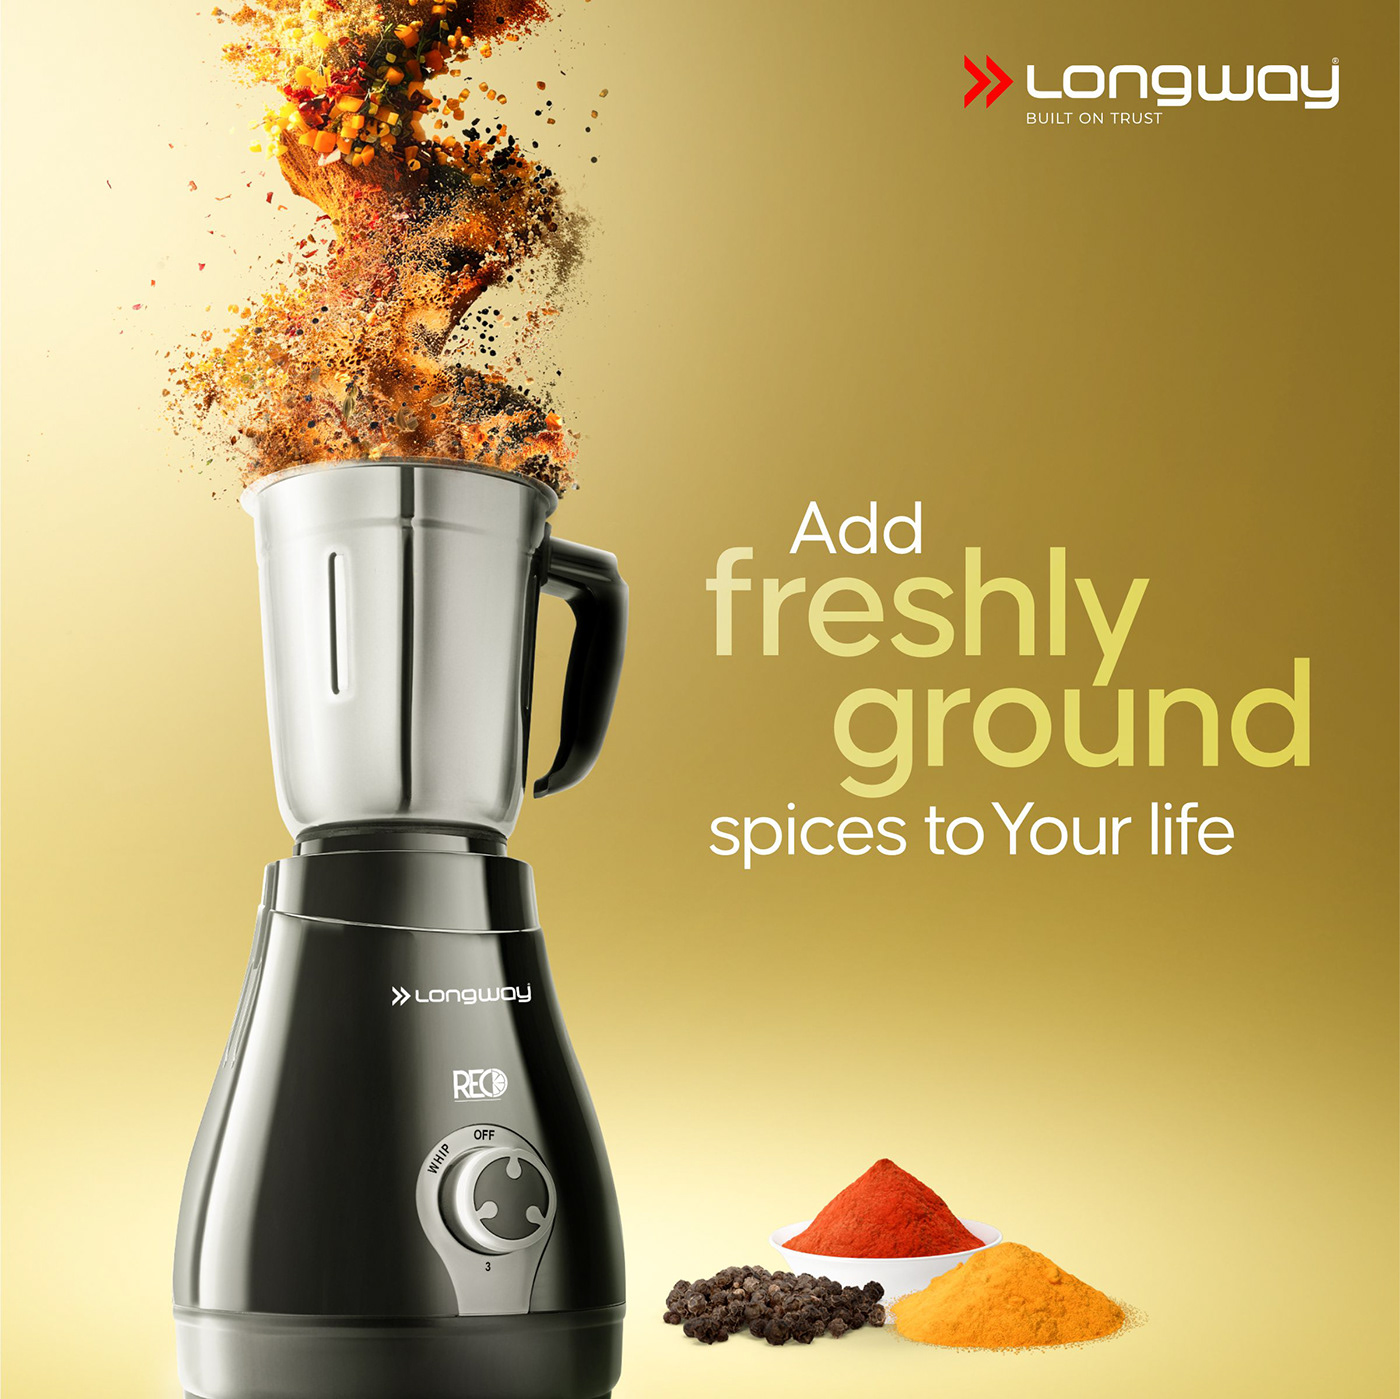 Add Spices to your life with the Longway Reo Mixer Grinder.